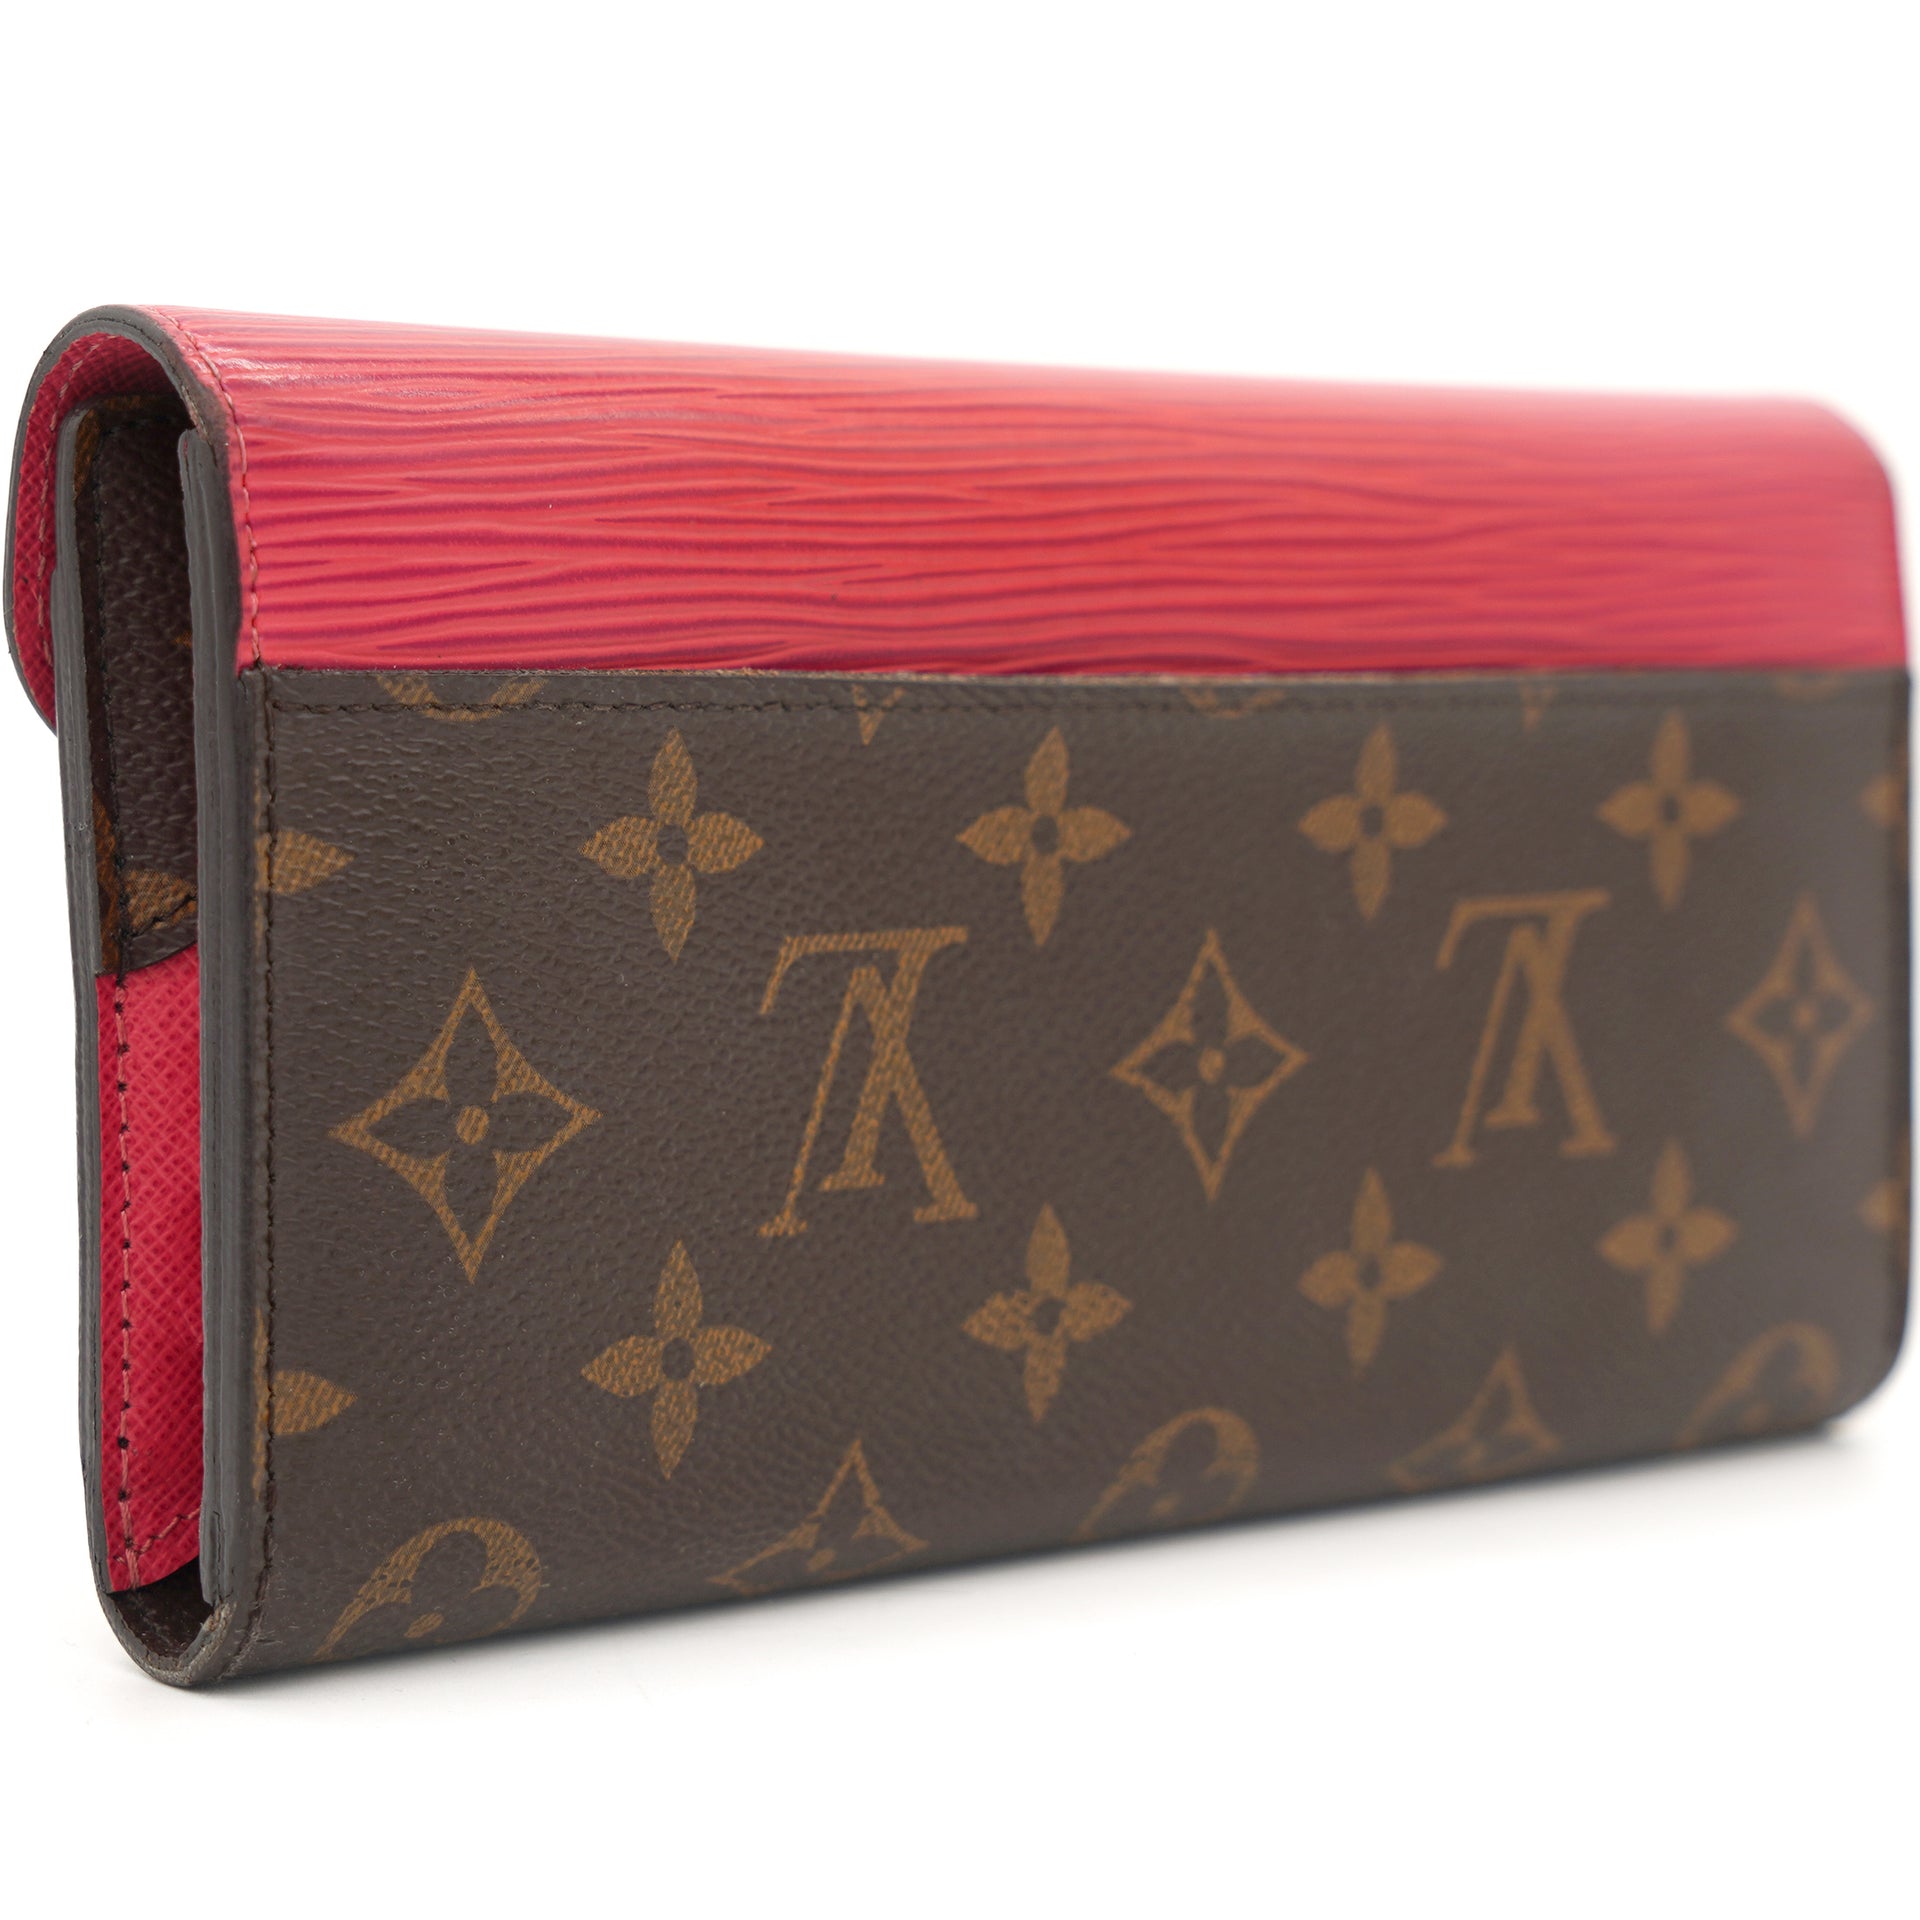 Cherry Epi Leather and Monogram Canvas Marie-Lou Long Wallet